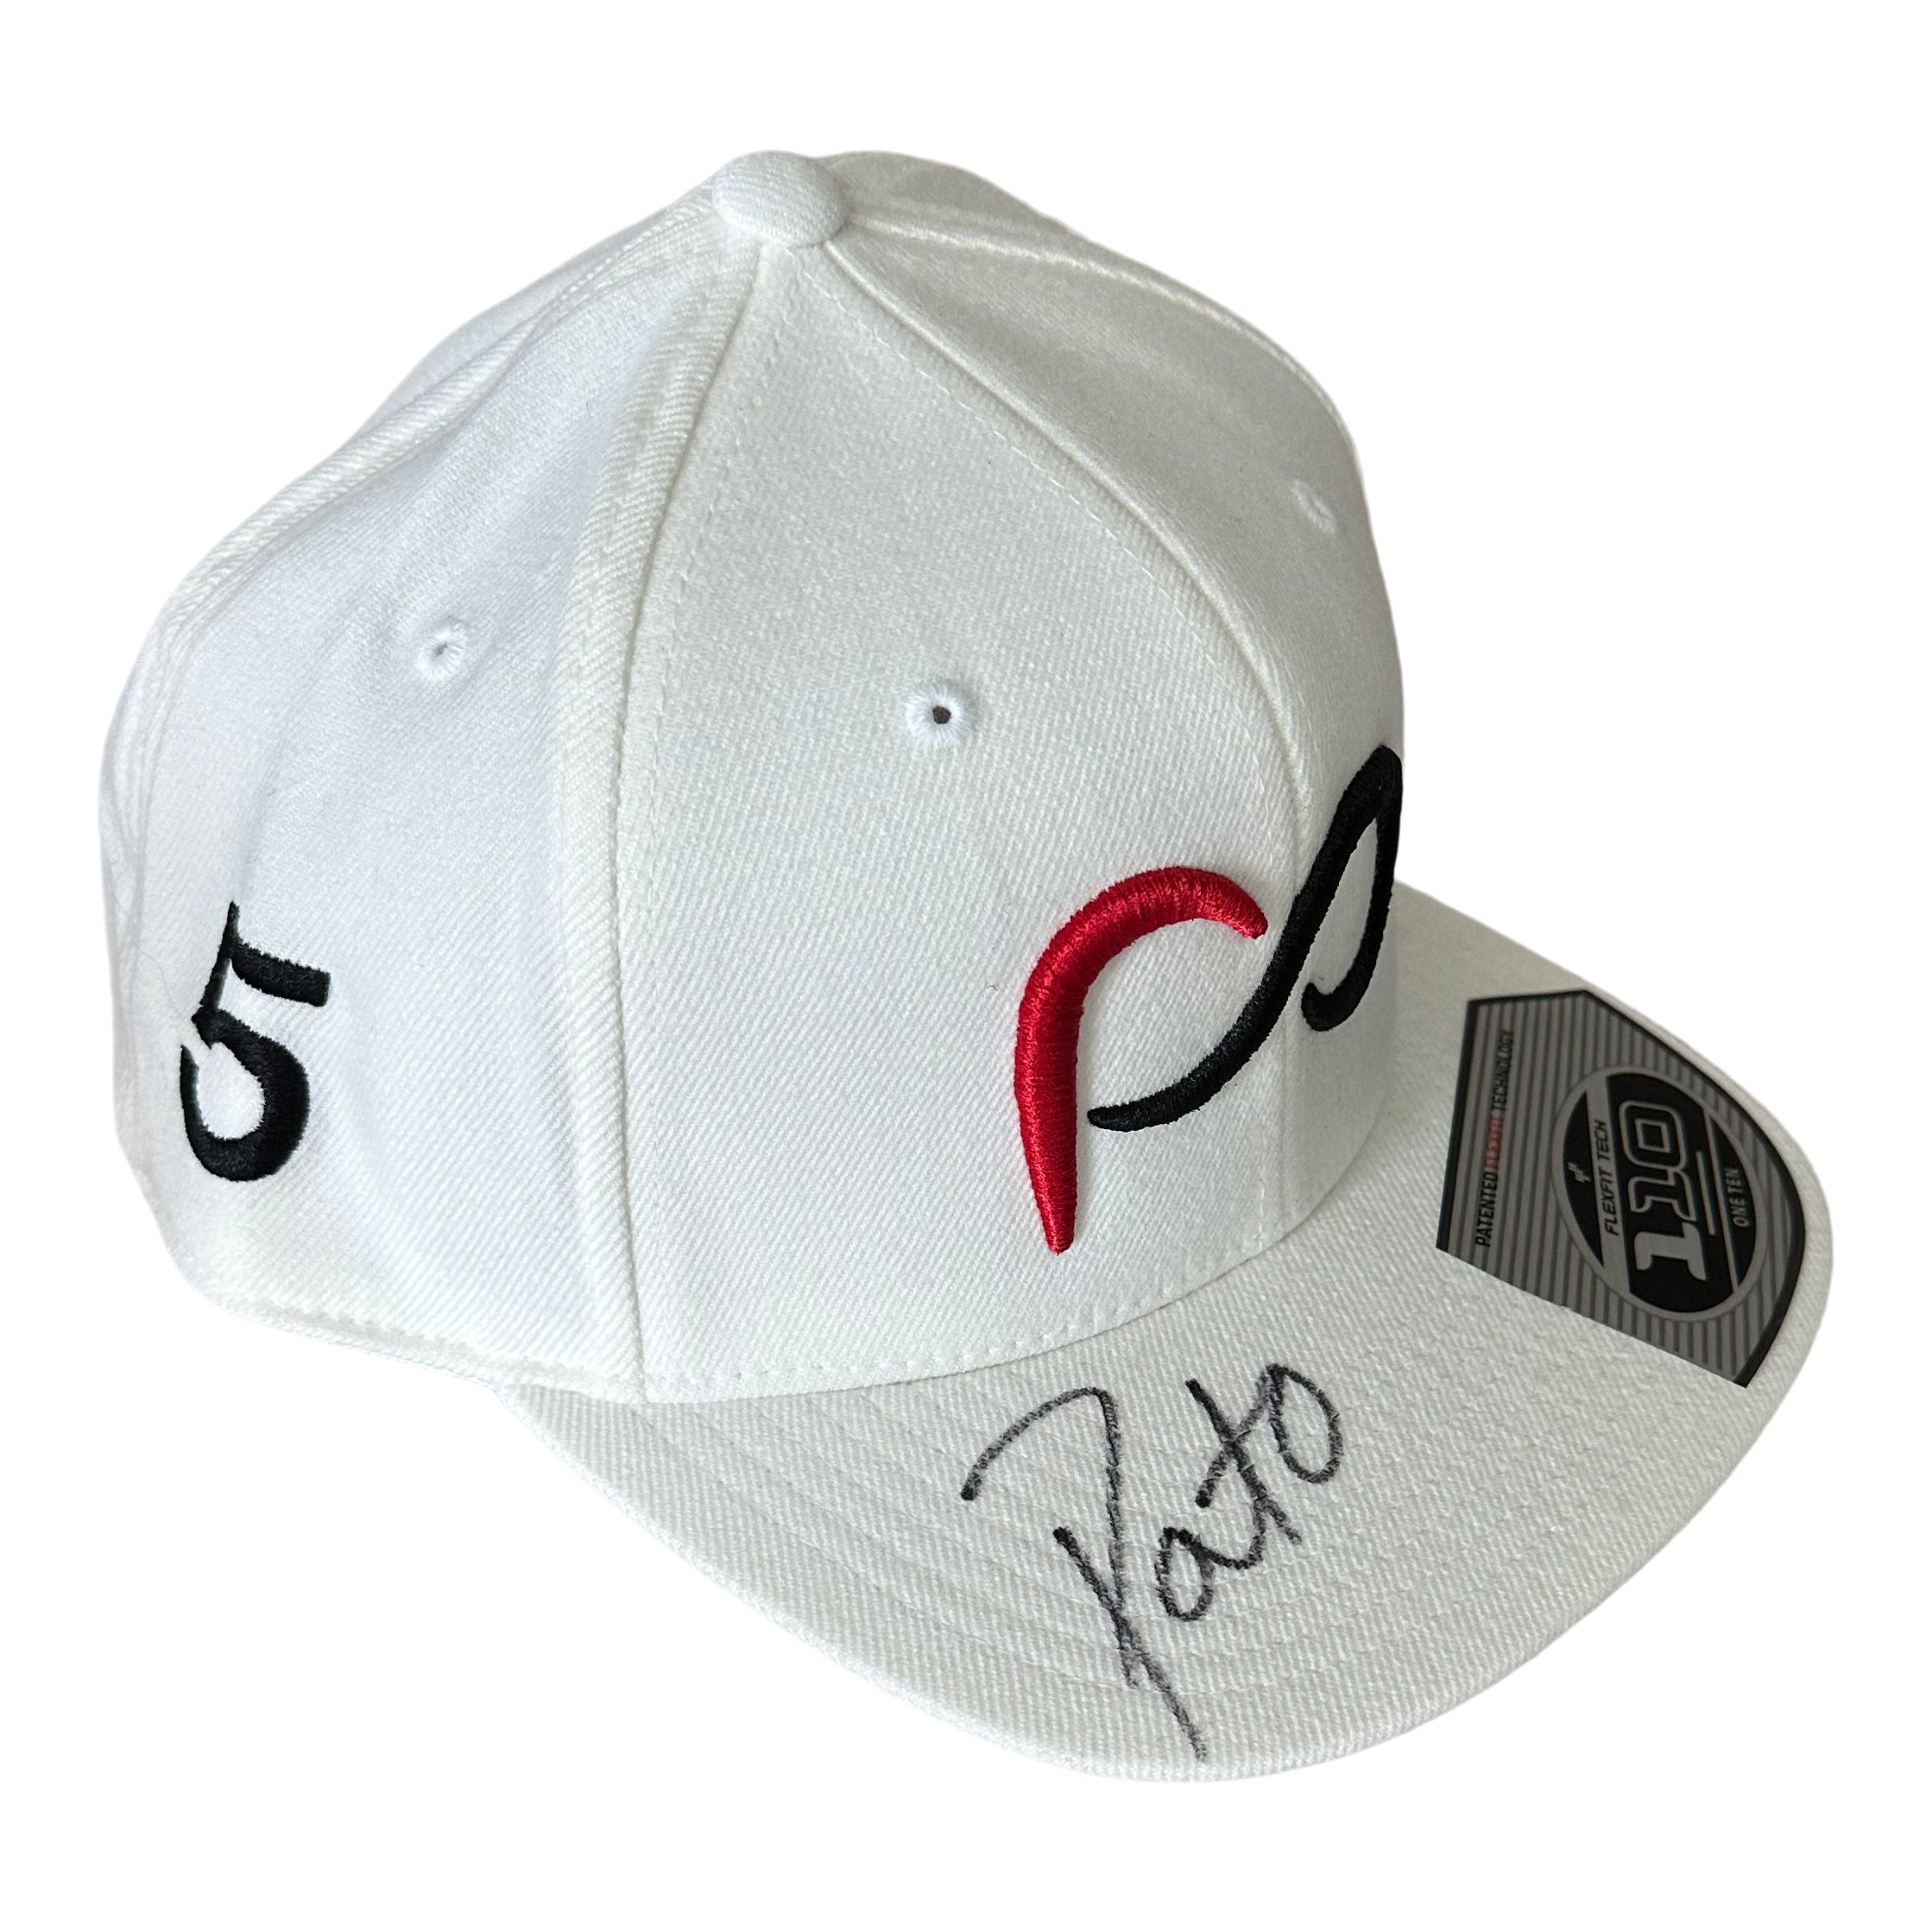 *Autographed* White Flat Bill Cap with PO logo 3D in front and #5 black on side